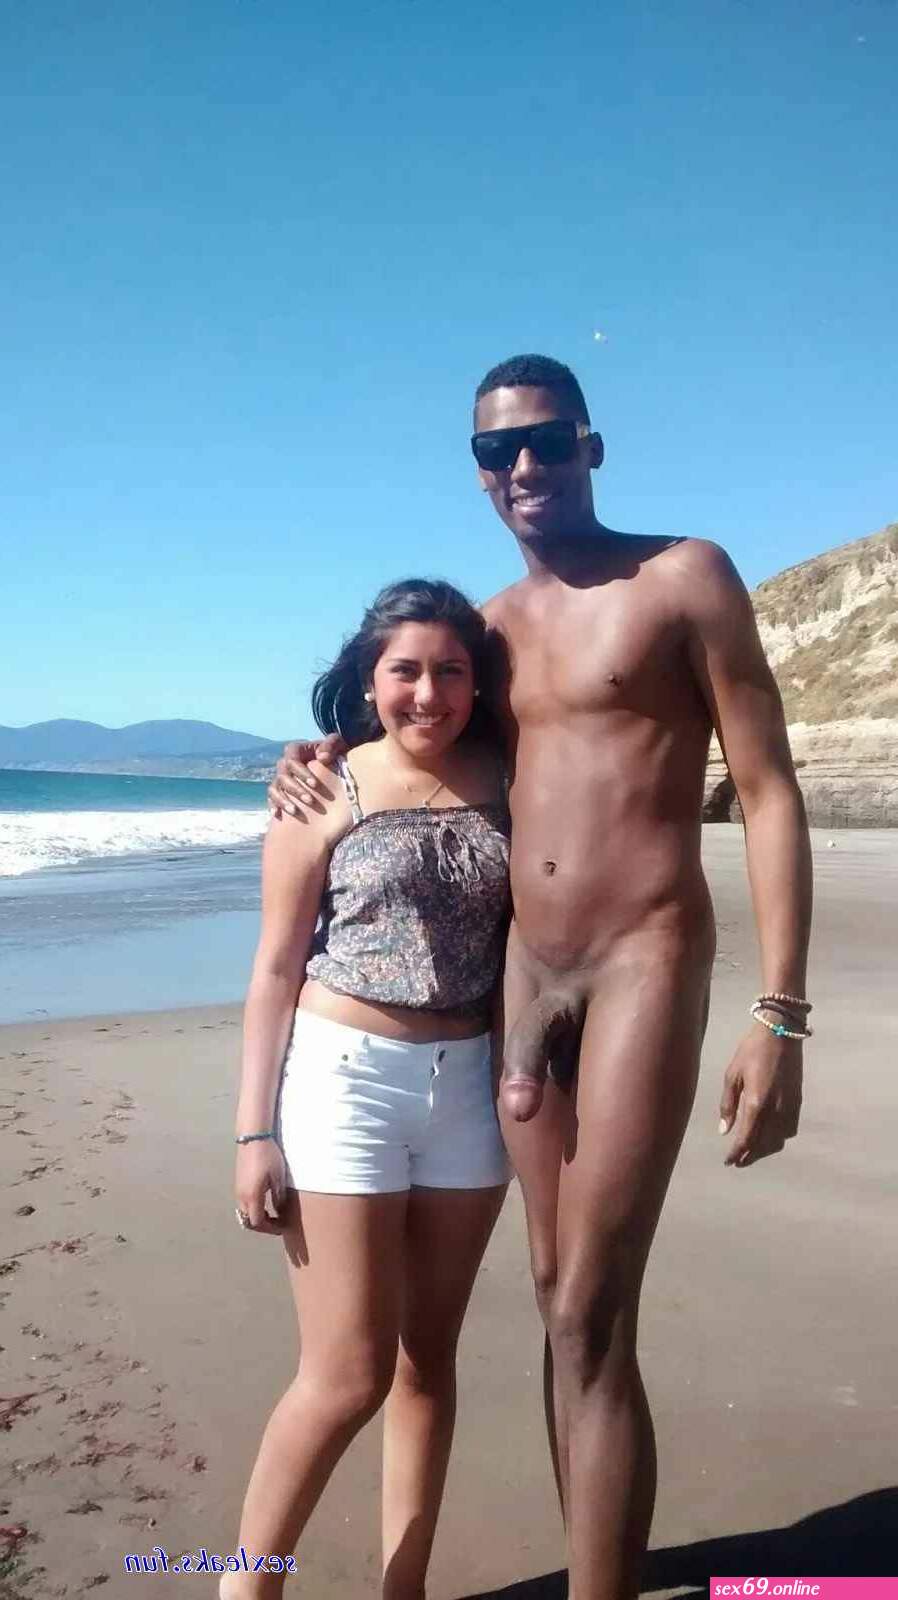 huge dicks on beach picture photo